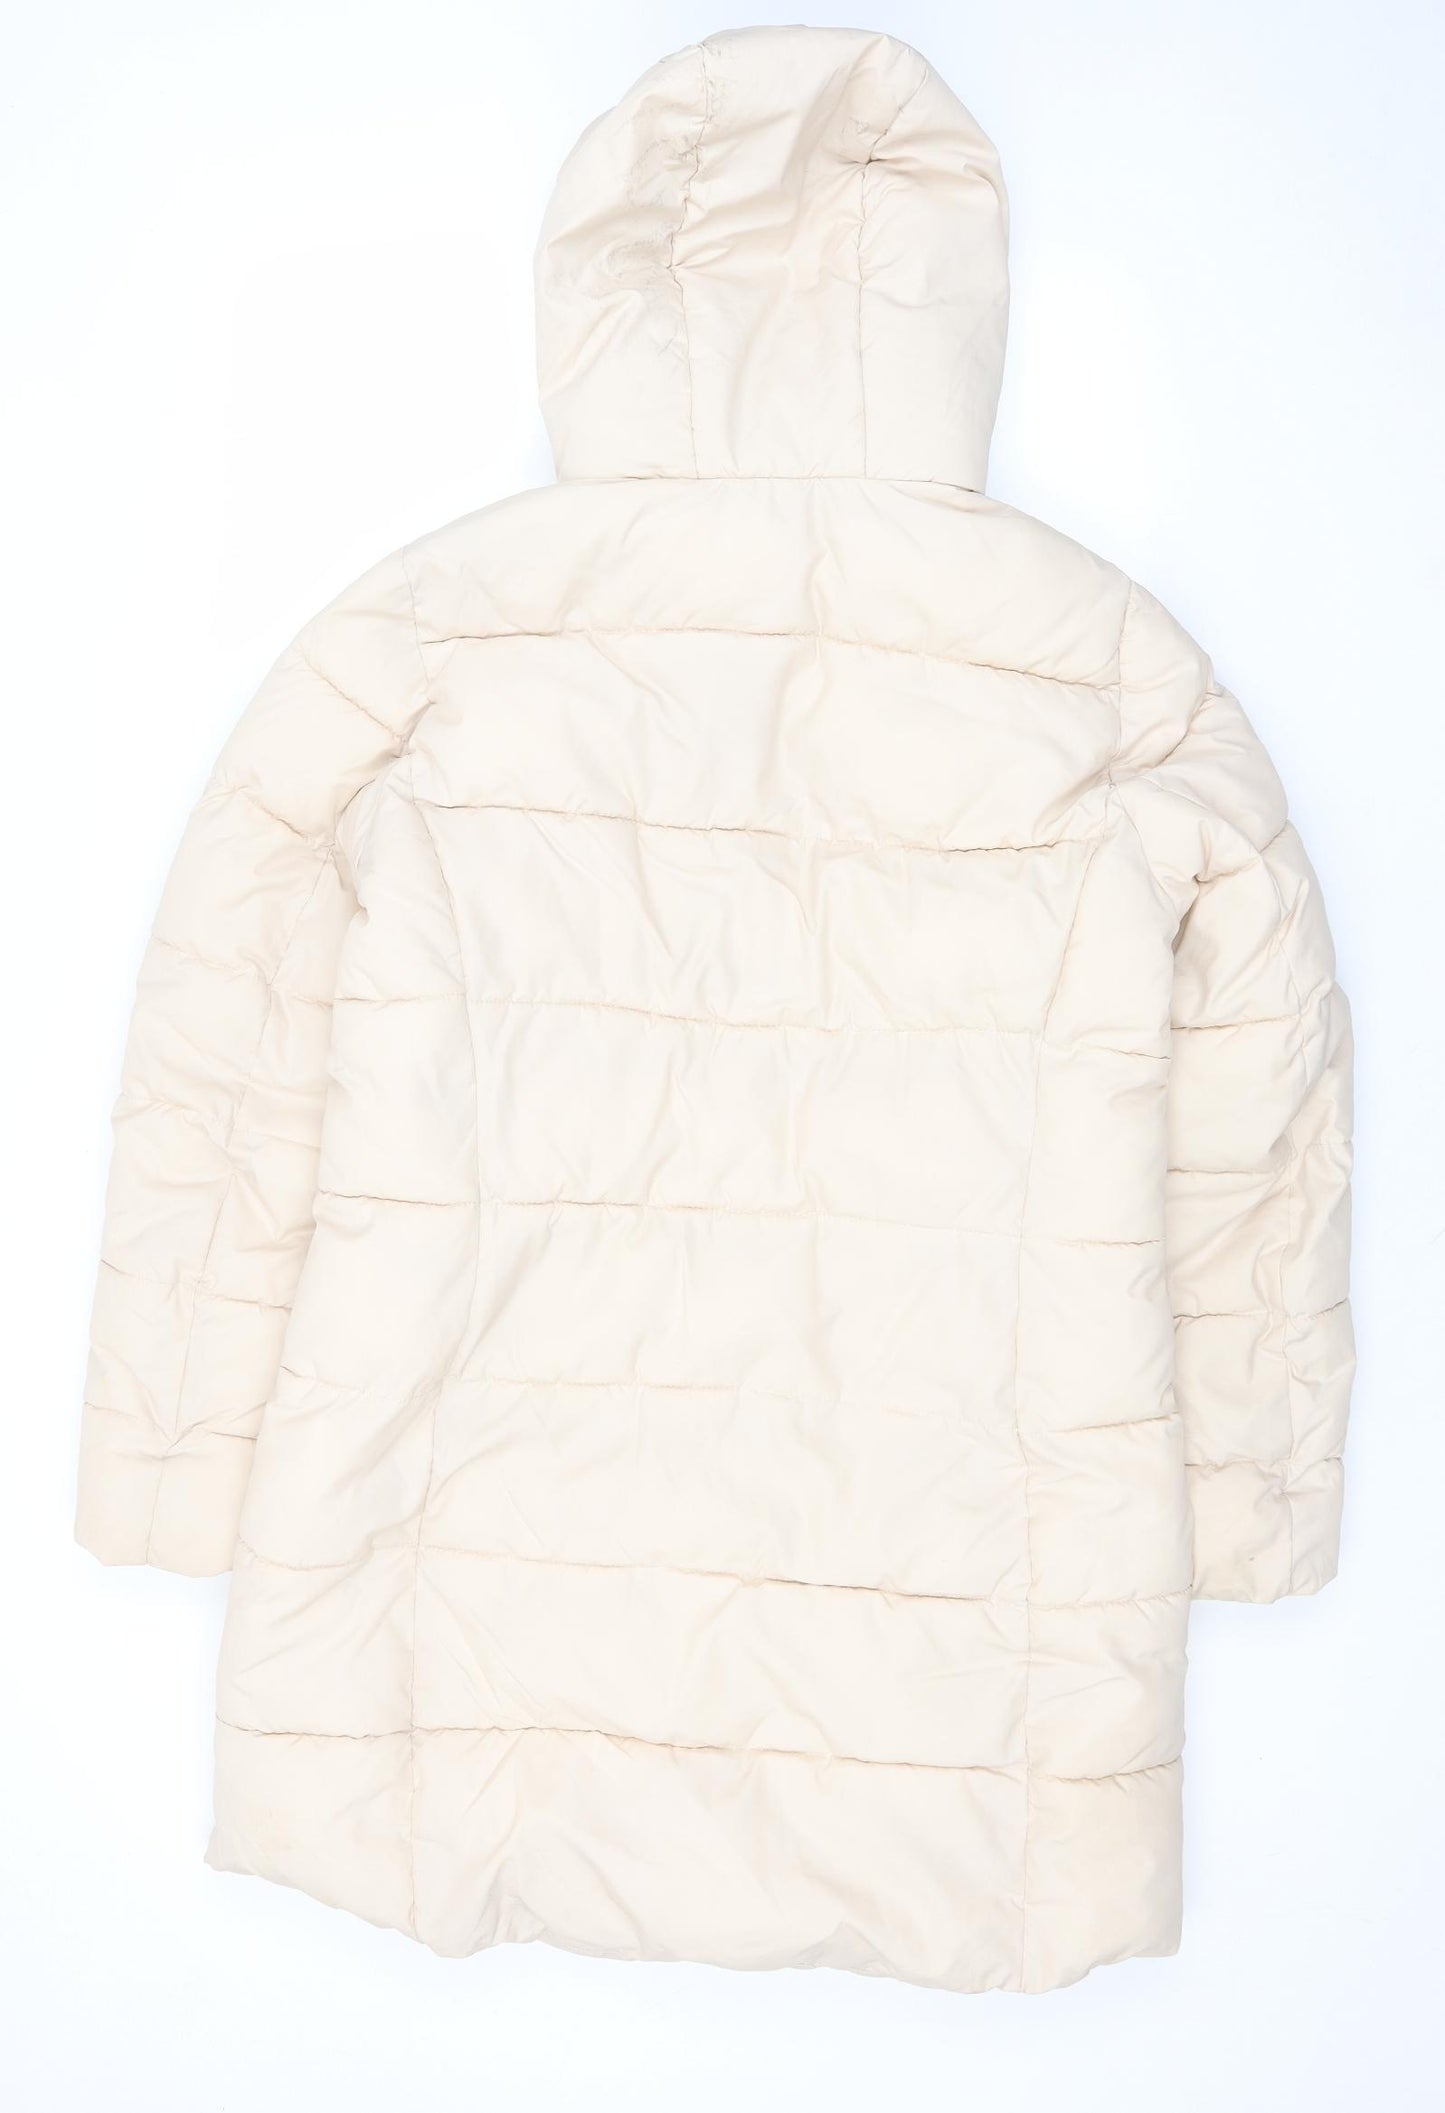 H&M Womens Beige Quilted Coat Size M Zip